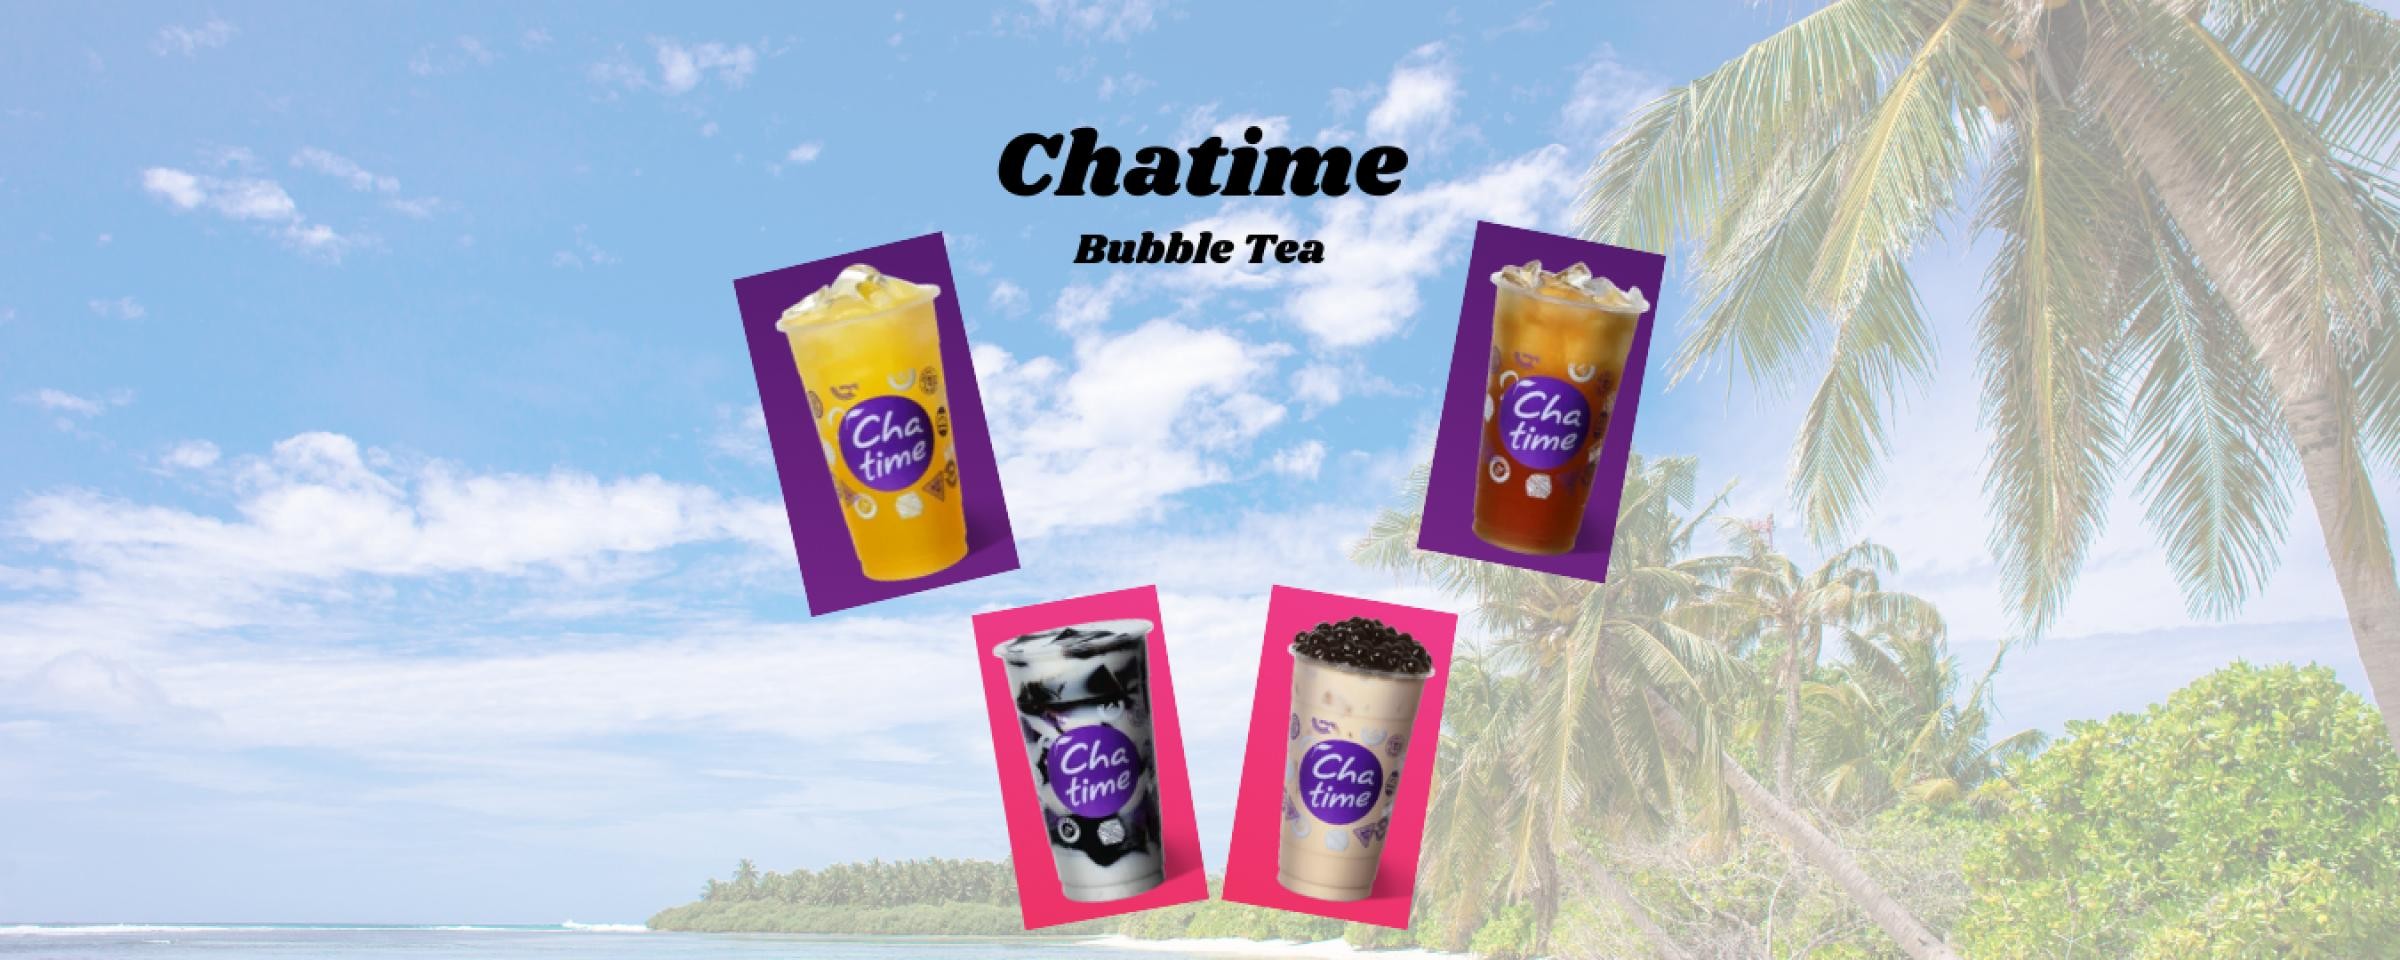 Chatime franchise bubble tea shop nearby city for sale at plant...